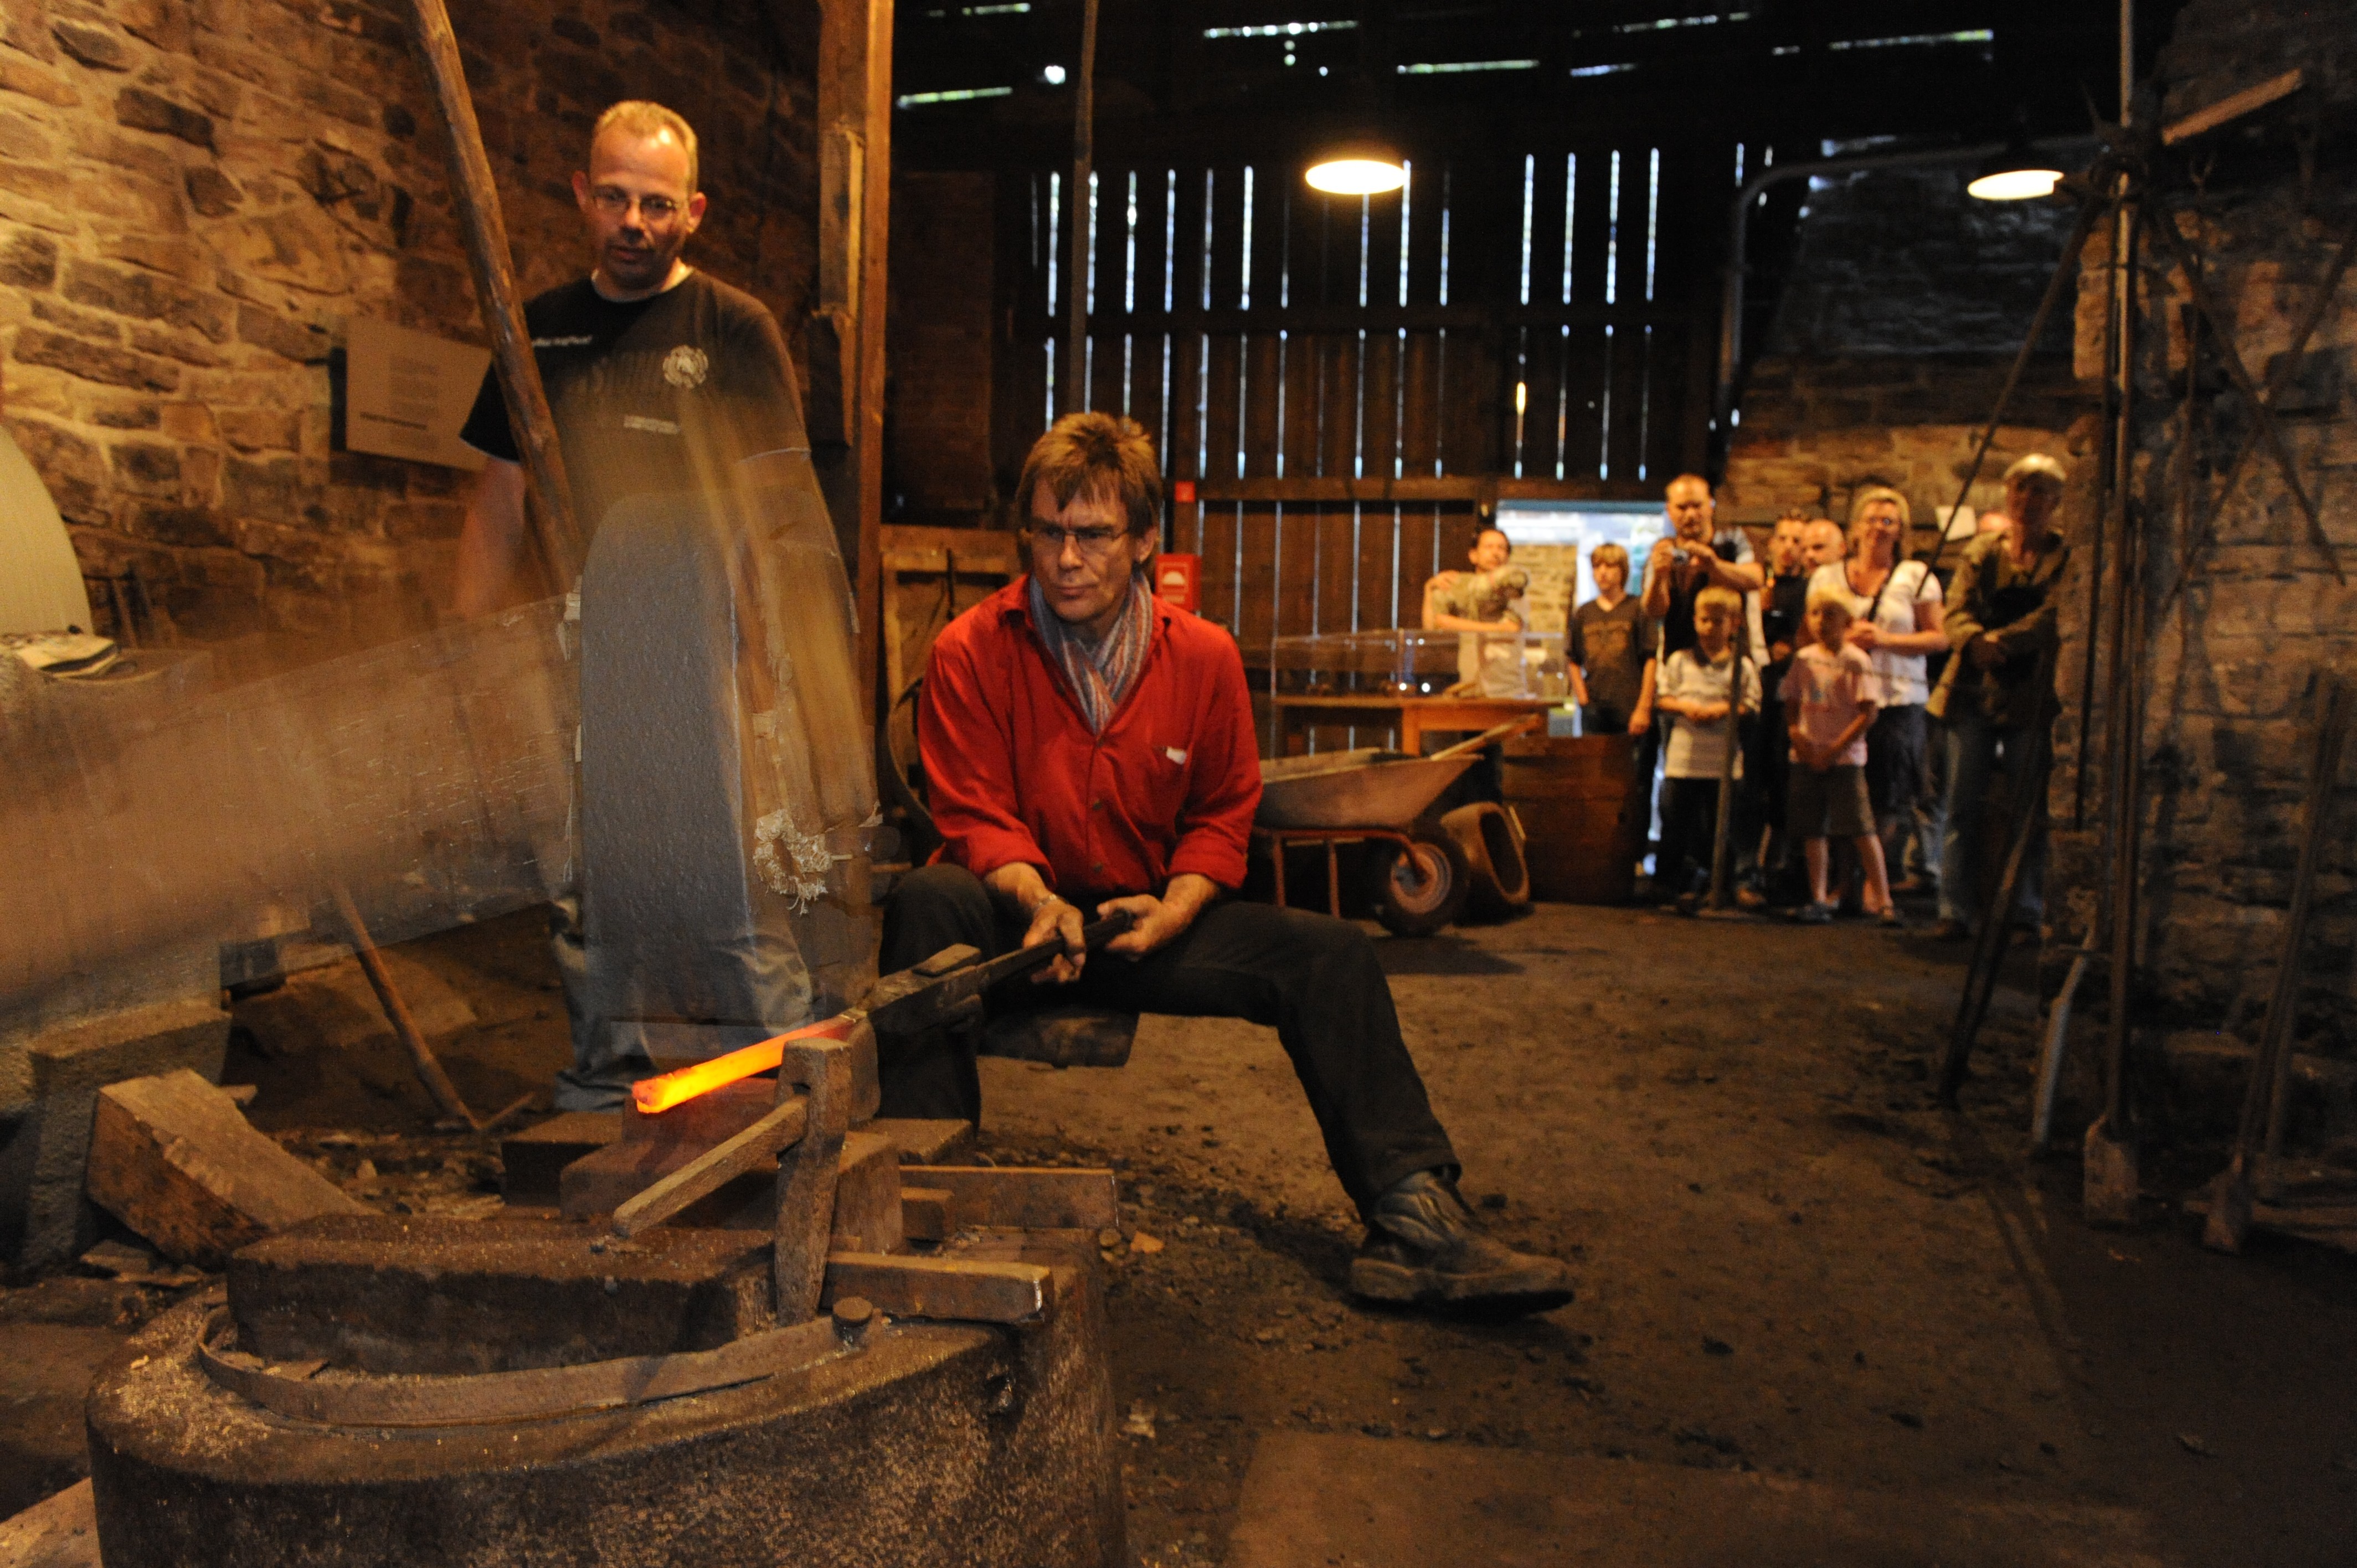 The sluice gate boy works at the forging hammer alongside the forger. He regulates the water feed to the hammer shaft via a shutter. In this way it is possible to regulate the beating speed of the hammer. The forger indicates by nodding his head the appropriate forging speed. They understand each other without words. 